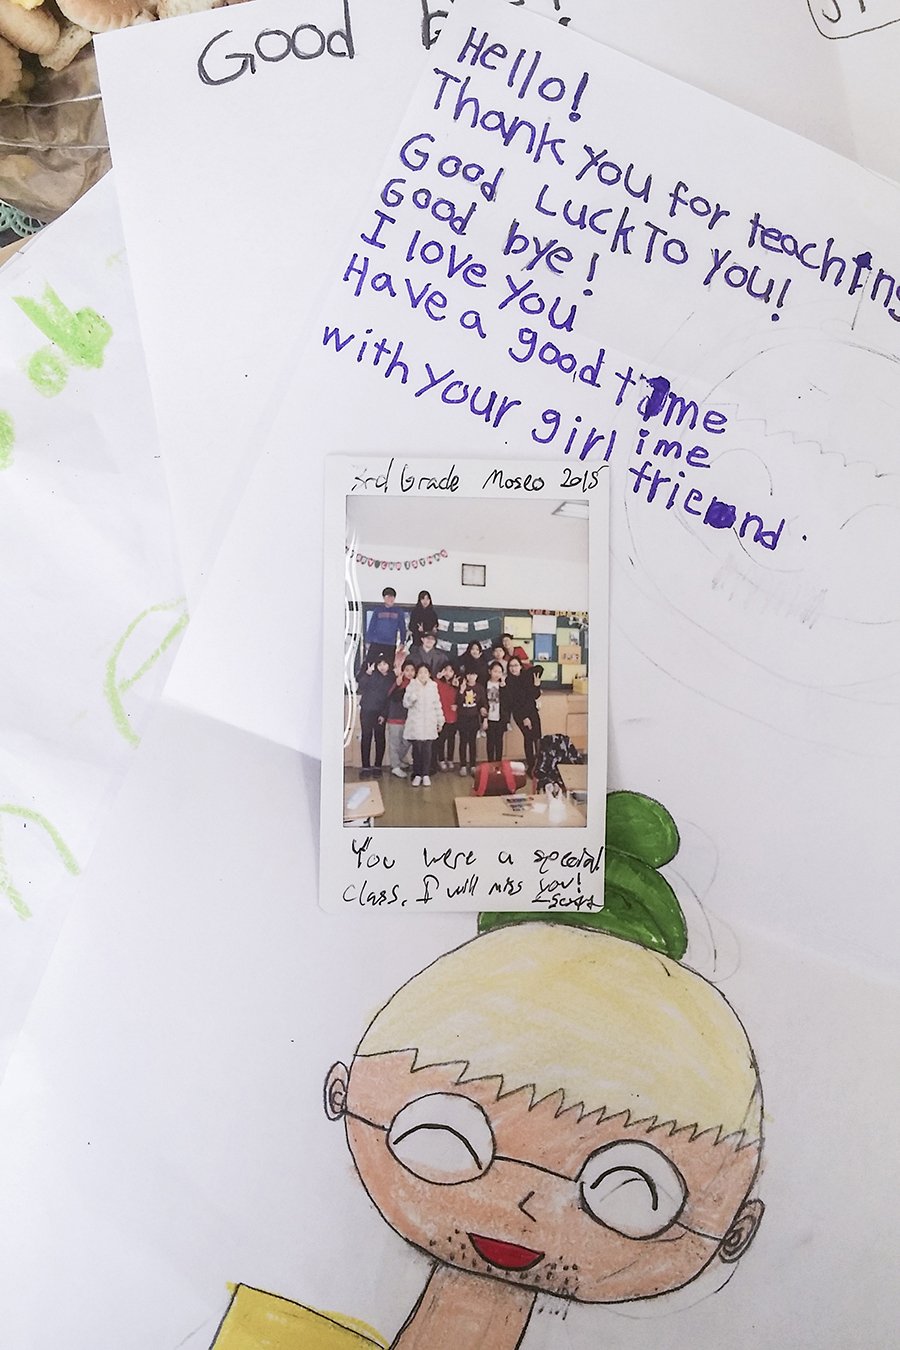 Farewell notes from elementary kids in Sangju, South Korea.